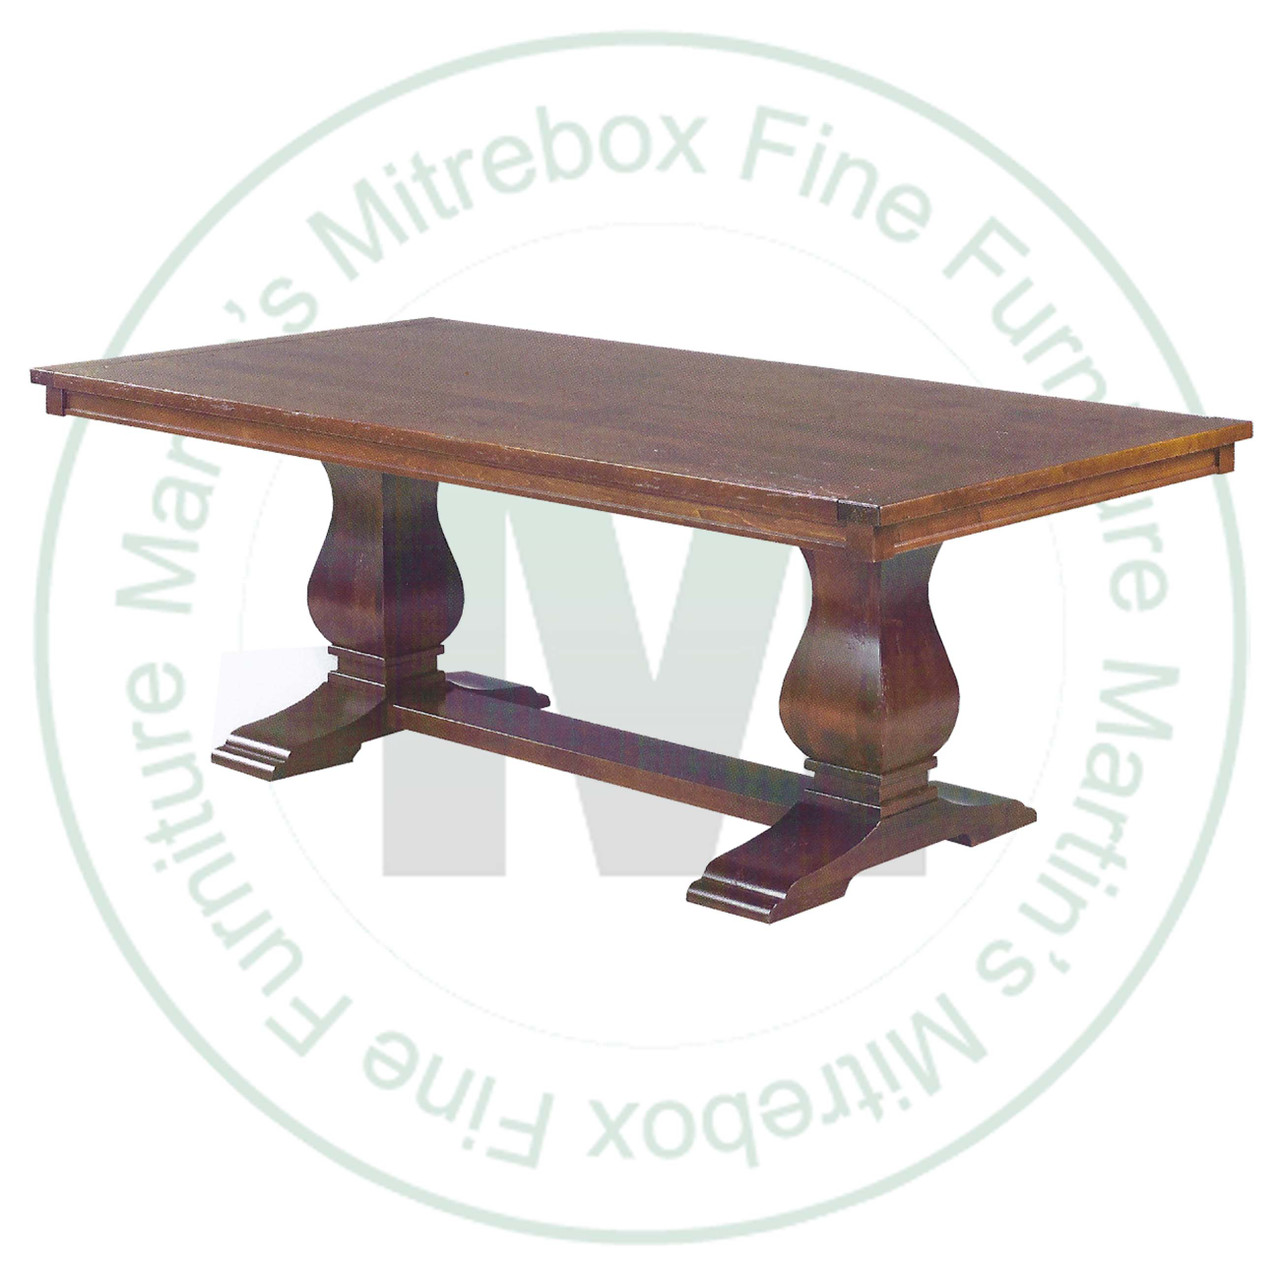 Maple Socrates Double Pedestal Table 42''D x 72''W x 30''H With 3 - 12'' Leaves. Table Has 1.25'' Thick Top